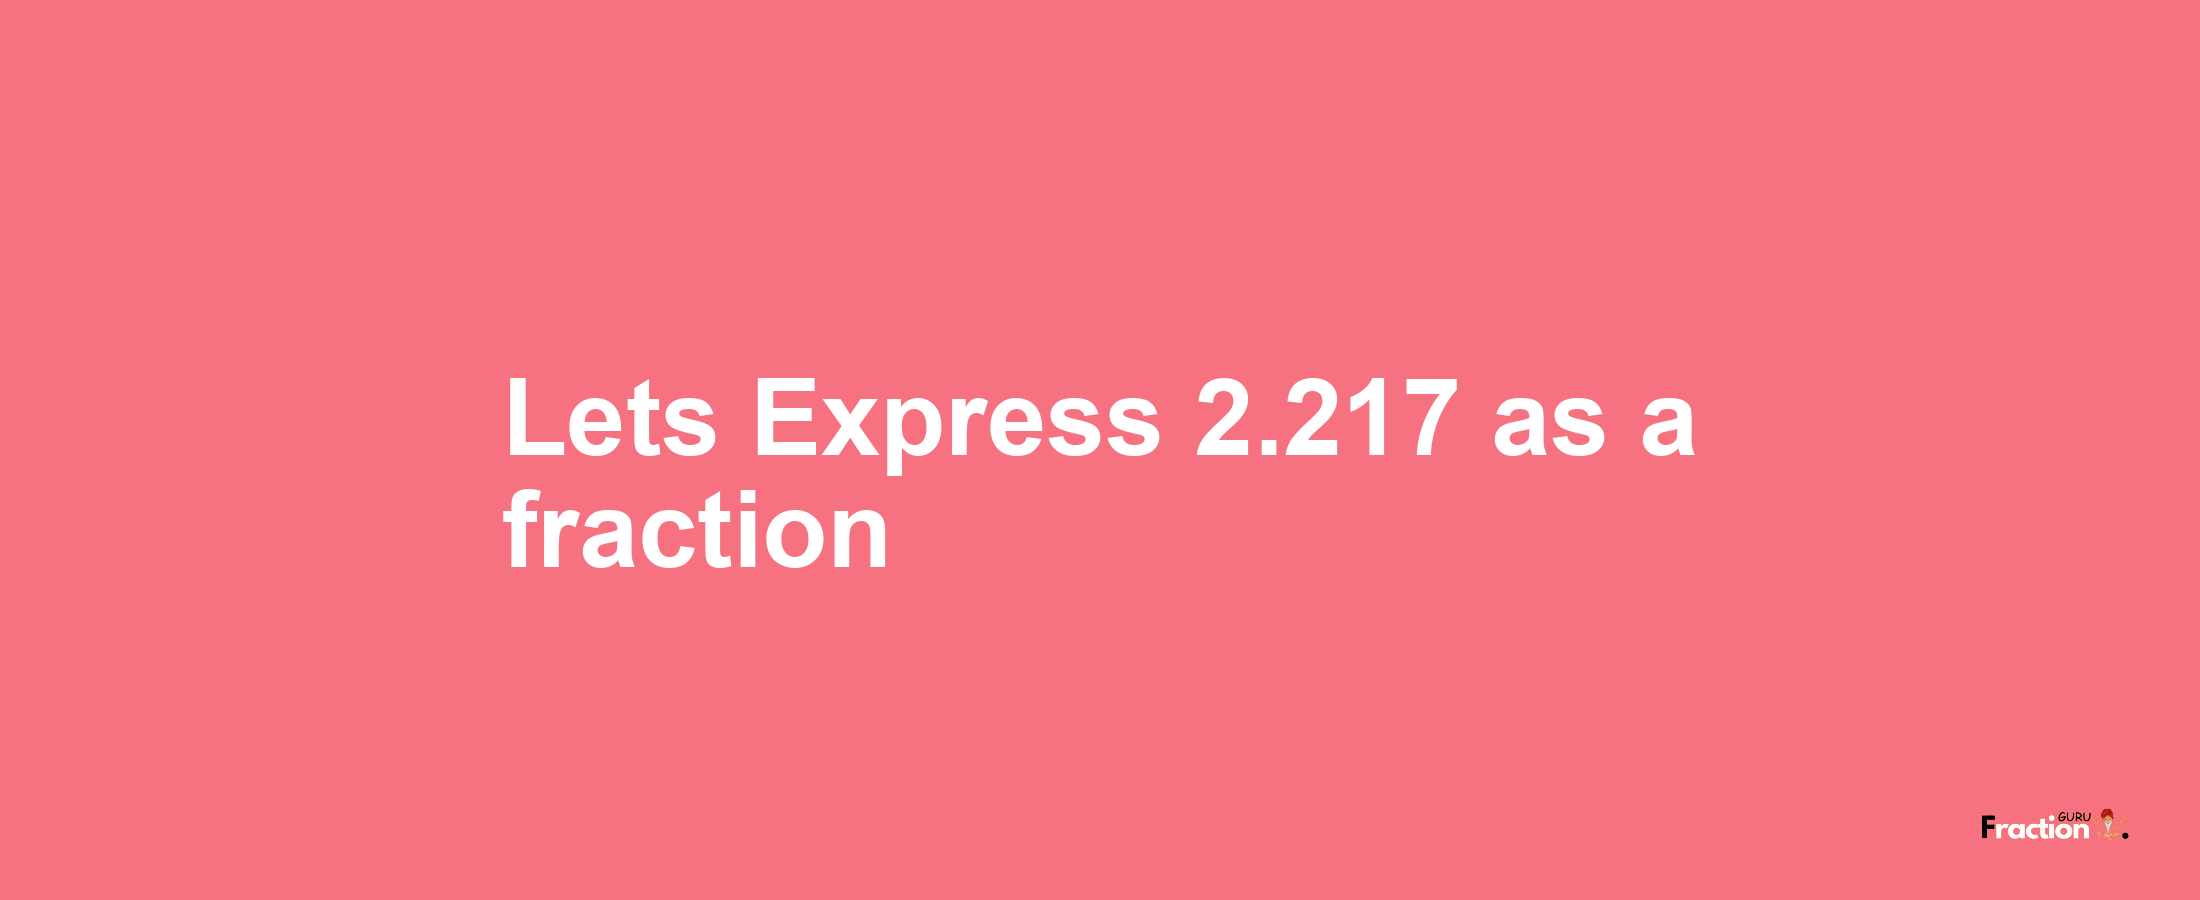 Lets Express 2.217 as afraction